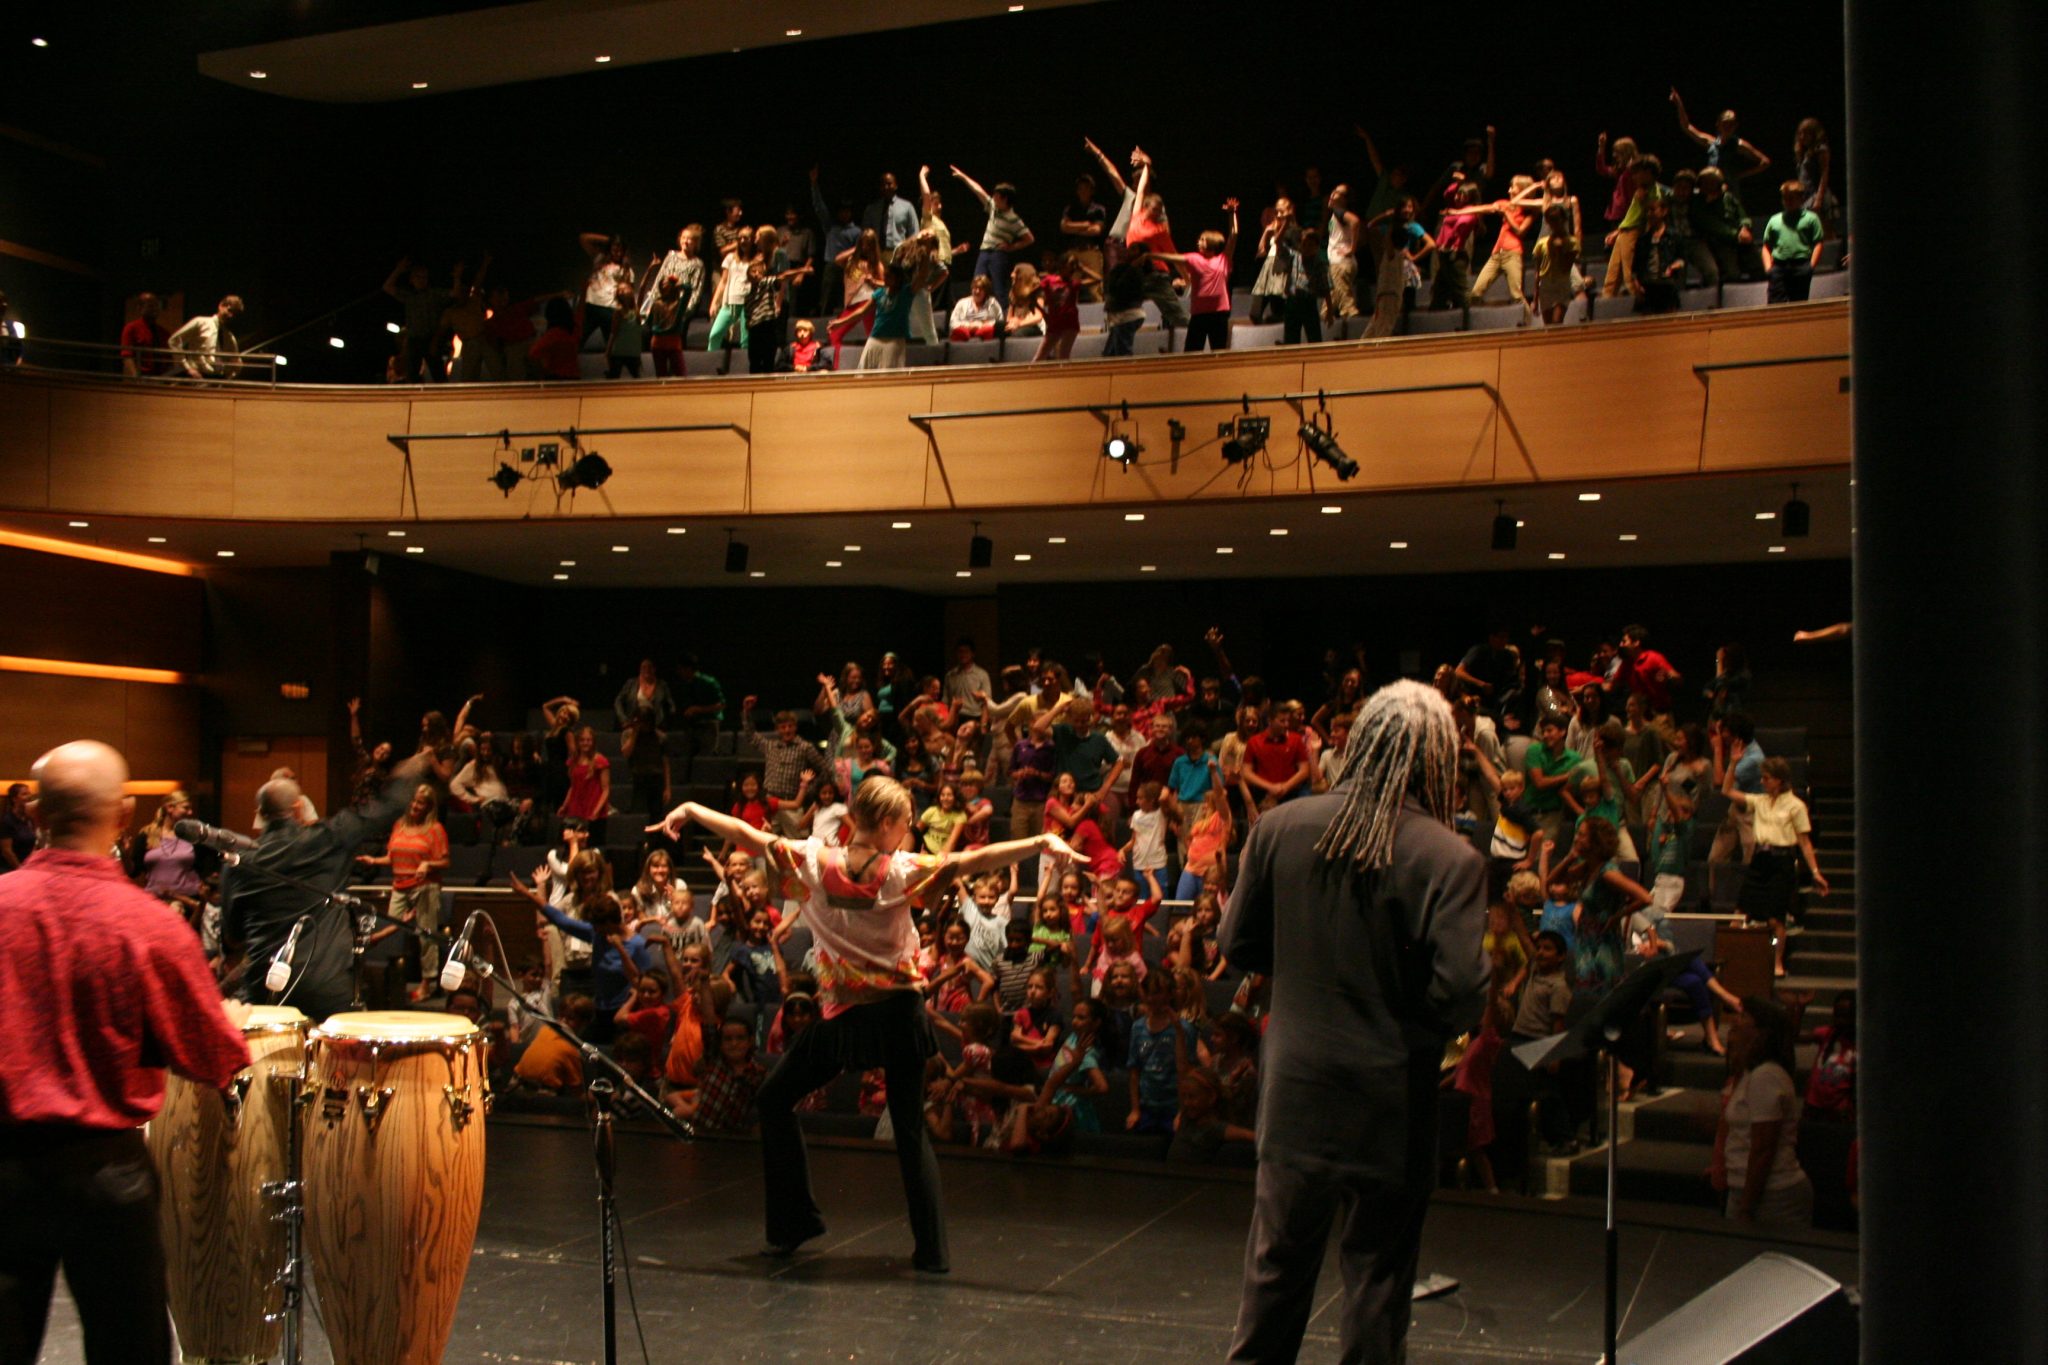 Performers entertain the audience in the TJ Concert Hall